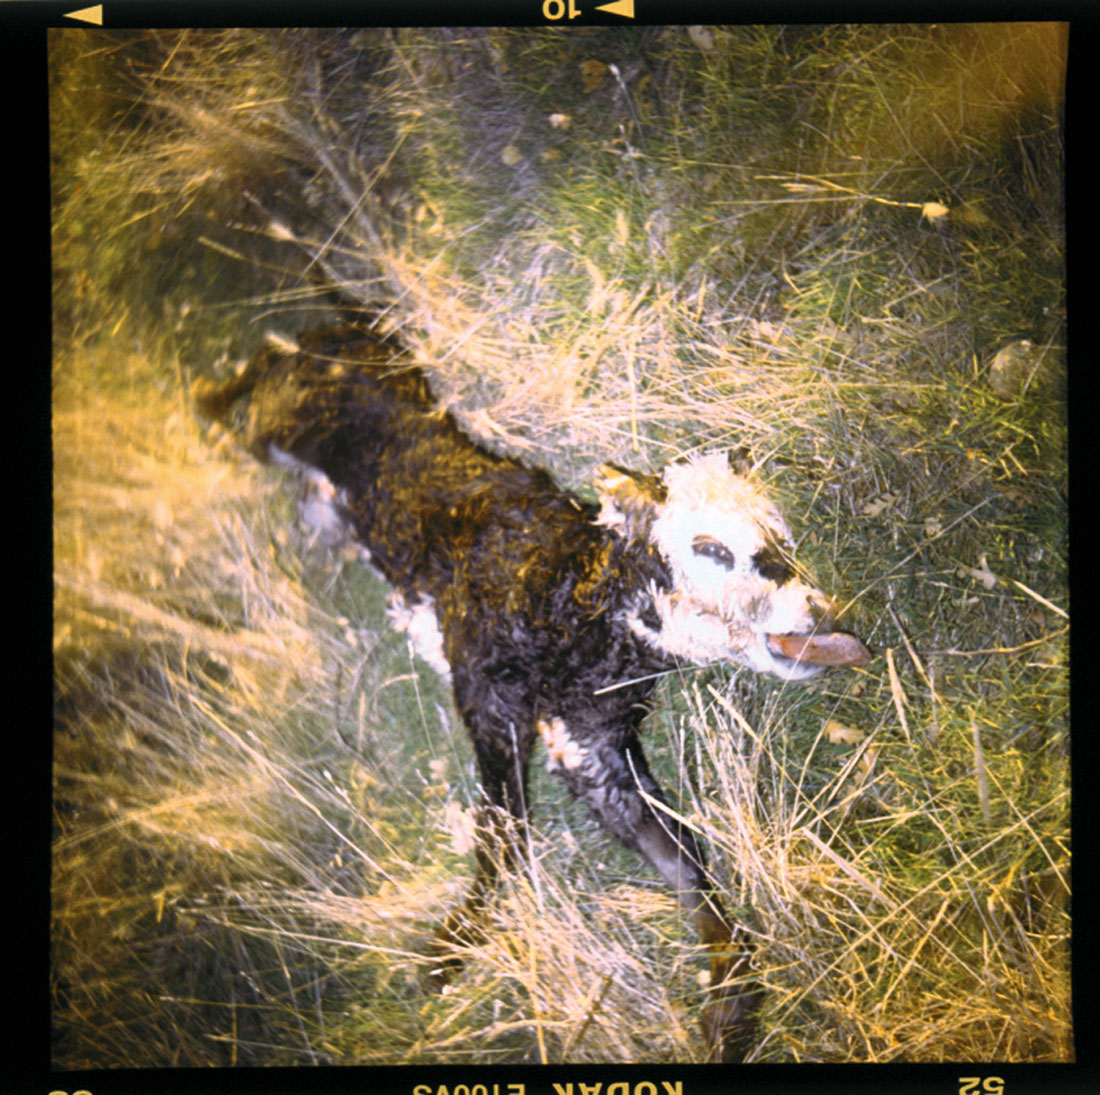 dead baby cow